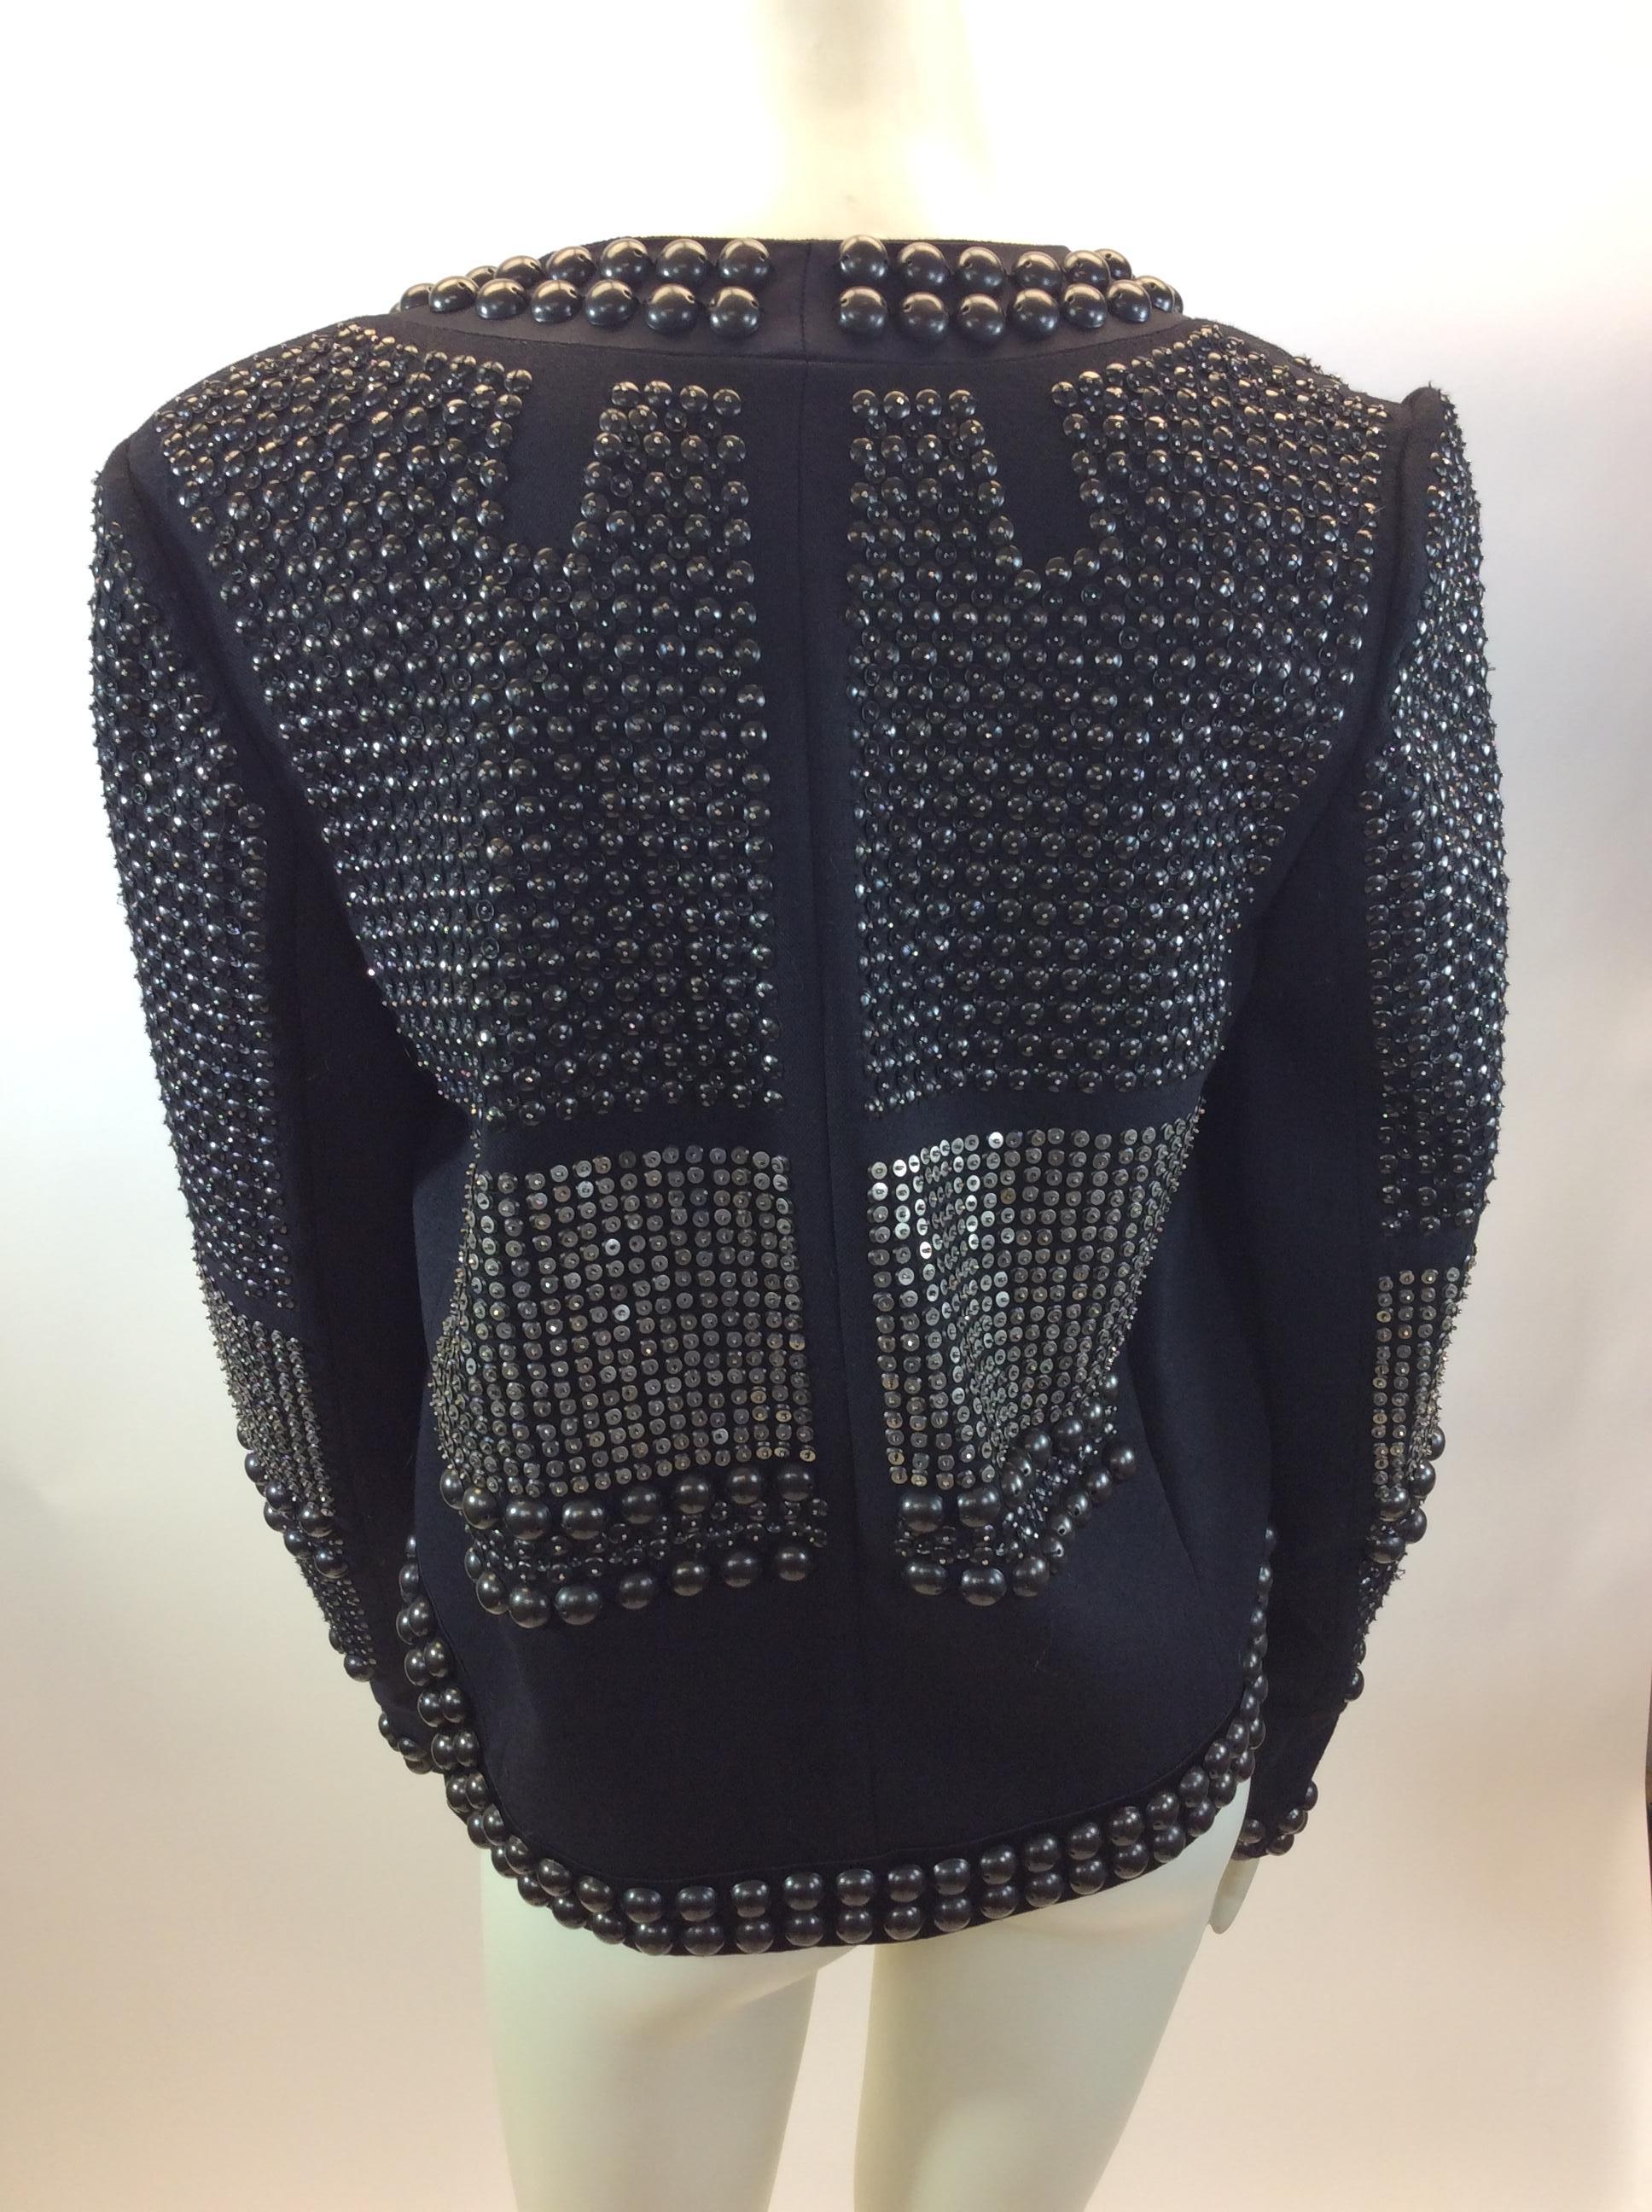 Isabel Marant Black Studded Jacket In Good Condition For Sale In Narberth, PA